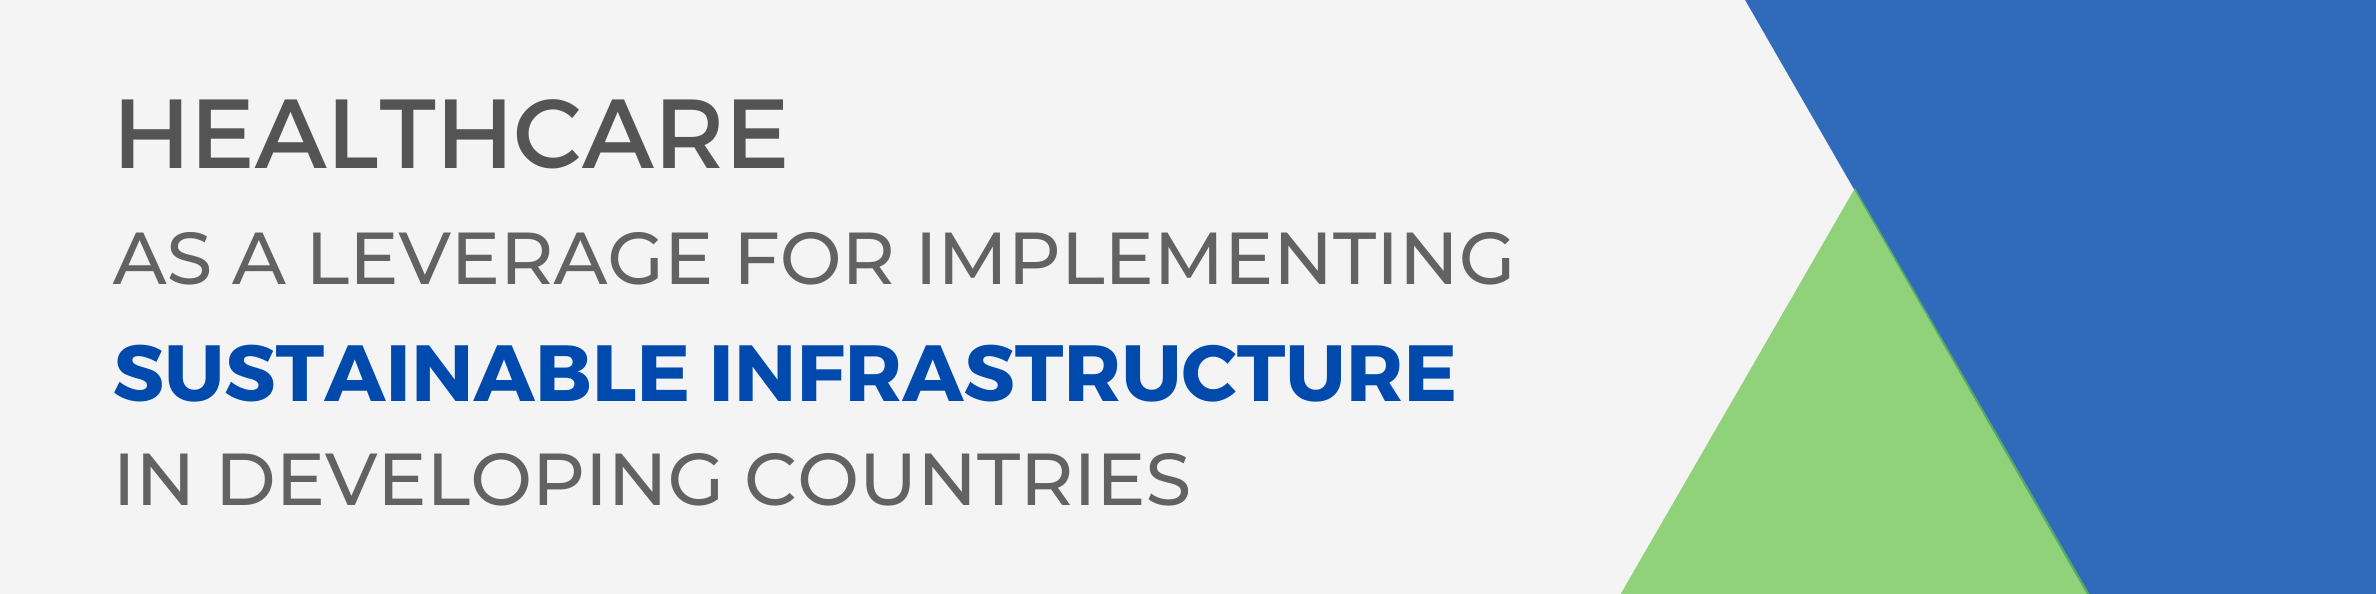 Healthcare as a leverage for implementing Sustainable Infrastructure in developing countries 6